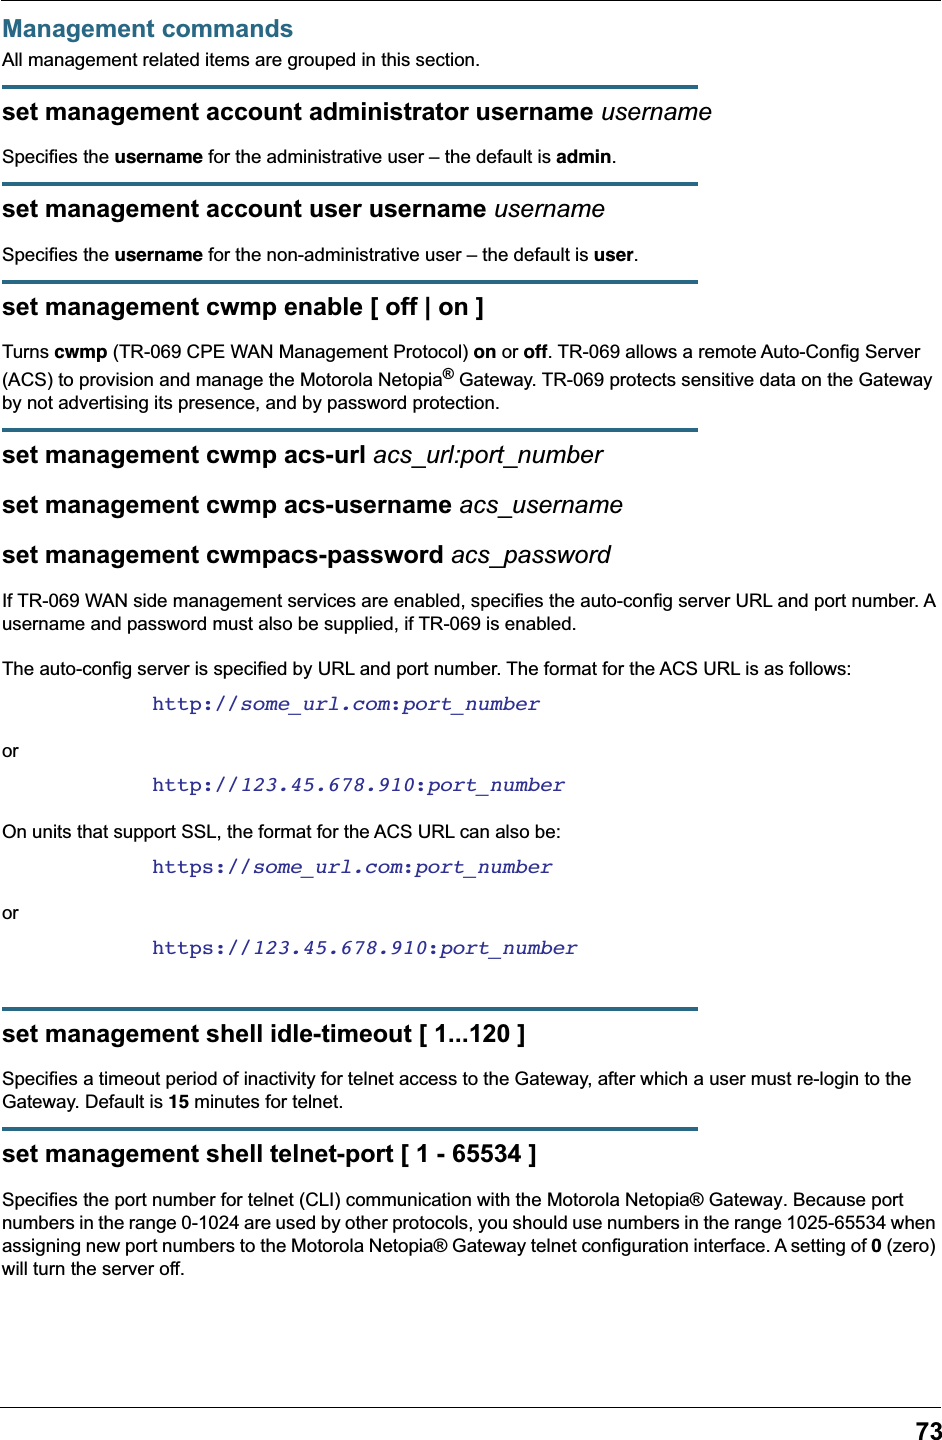 73Management commandsAll management related items are grouped in this section.set management account administrator username usernameSpecifies the username for the administrative user – the default is admin.set management account user username usernameSpecifies the username for the non-administrative user – the default is user.set management cwmp enable [ off | on ]Turns cwmp (TR-069 CPE WAN Management Protocol) on or off. TR-069 allows a remote Auto-Config Server (ACS) to provision and manage the Motorola Netopia® Gateway. TR-069 protects sensitive data on the Gateway by not advertising its presence, and by password protection.set management cwmp acs-url acs_url:port_numberset management cwmp acs-username acs_usernameset management cwmpacs-password acs_passwordIf TR-069 WAN side management services are enabled, specifies the auto-config server URL and port number. A username and password must also be supplied, if TR-069 is enabled.The auto-config server is specified by URL and port number. The format for the ACS URL is as follows:http://some_url.com:port_numberorhttp://123.45.678.910:port_numberOn units that support SSL, the format for the ACS URL can also be:https://some_url.com:port_numberorhttps://123.45.678.910:port_numberset management shell idle-timeout [ 1...120 ]Specifies a timeout period of inactivity for telnet access to the Gateway, after which a user must re-login to the Gateway. Default is 15 minutes for telnet.set management shell telnet-port [ 1 - 65534 ]Specifies the port number for telnet (CLI) communication with the Motorola Netopia® Gateway. Because port numbers in the range 0-1024 are used by other protocols, you should use numbers in the range 1025-65534 when assigning new port numbers to the Motorola Netopia® Gateway telnet configuration interface. A setting of 0 (zero) will turn the server off.